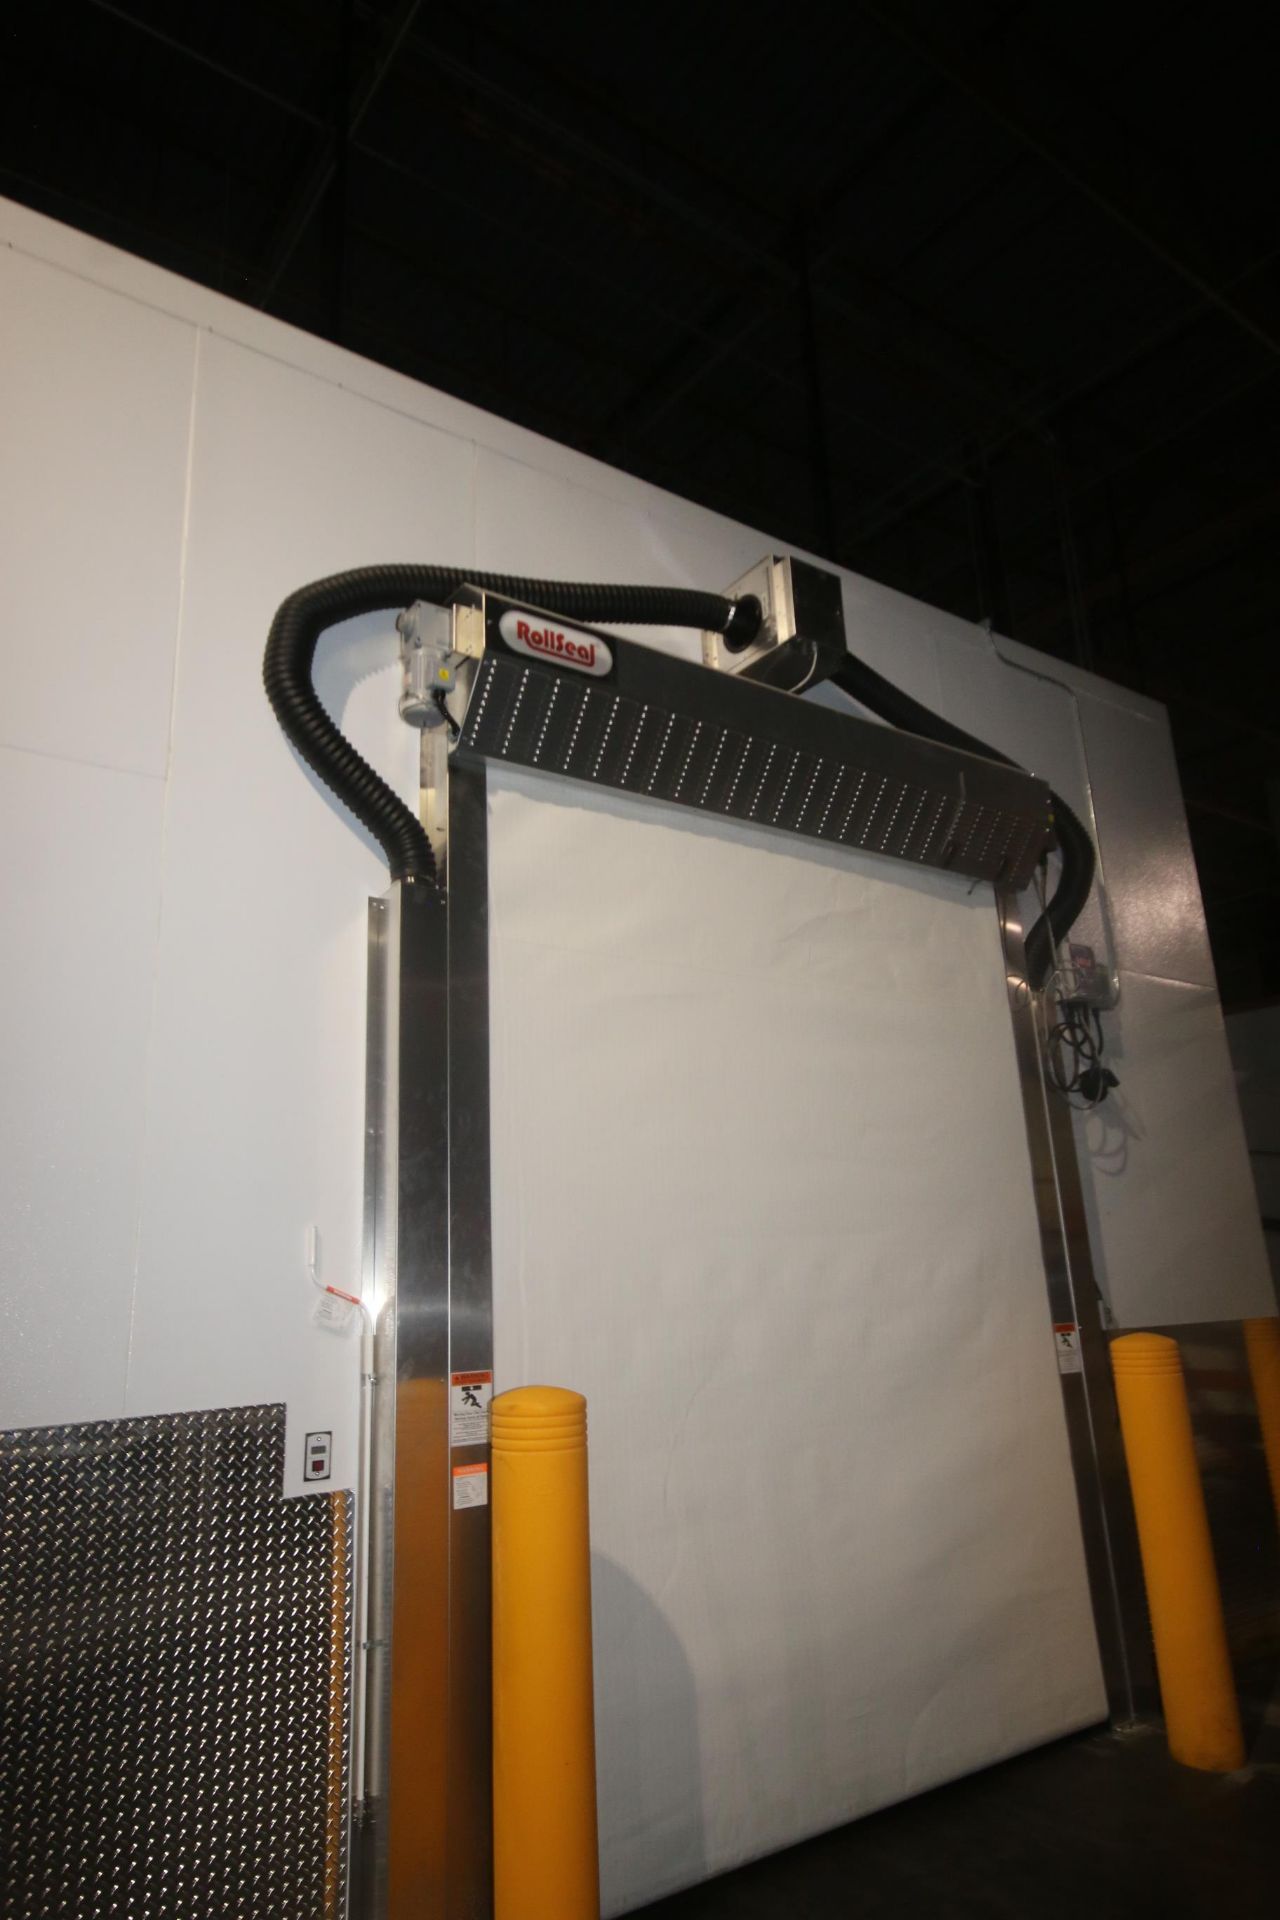 2018 RollSeal Air Tight Drive-Thru Modular Room, Overall Dims.: Aprox. 88' L x 20' W x 190" Tall, - Image 24 of 24